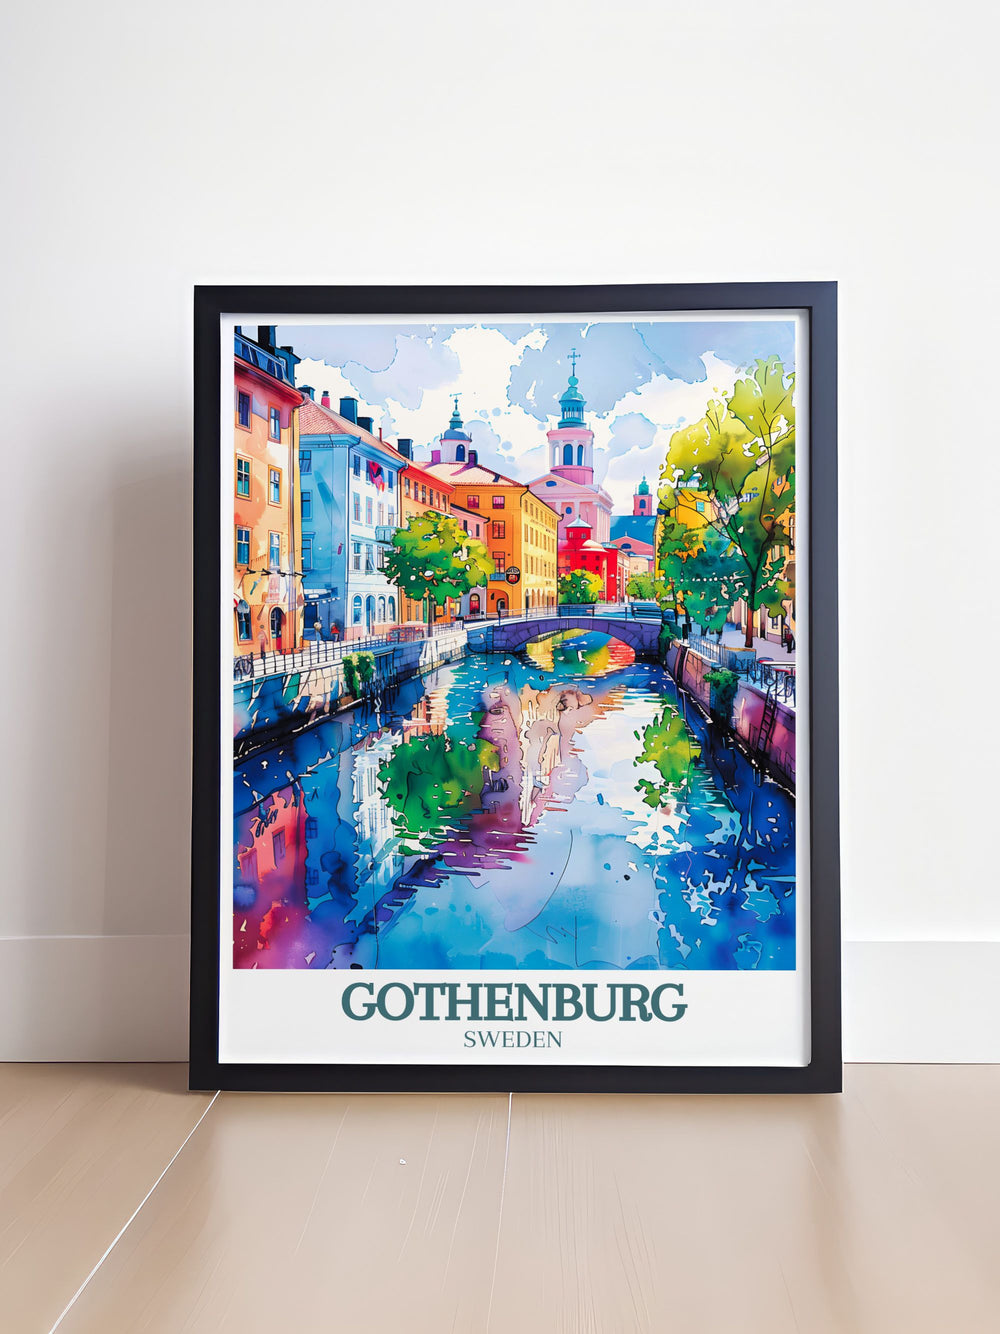 This vibrant travel poster captures the stunning architecture of Oscar Frederik Church in Gothenburg, showcasing its Gothic Revival style and intricate details. Perfect for lovers of history and architecture, this artwork brings the elegance of one of Gothenburgs most iconic landmarks into your home.